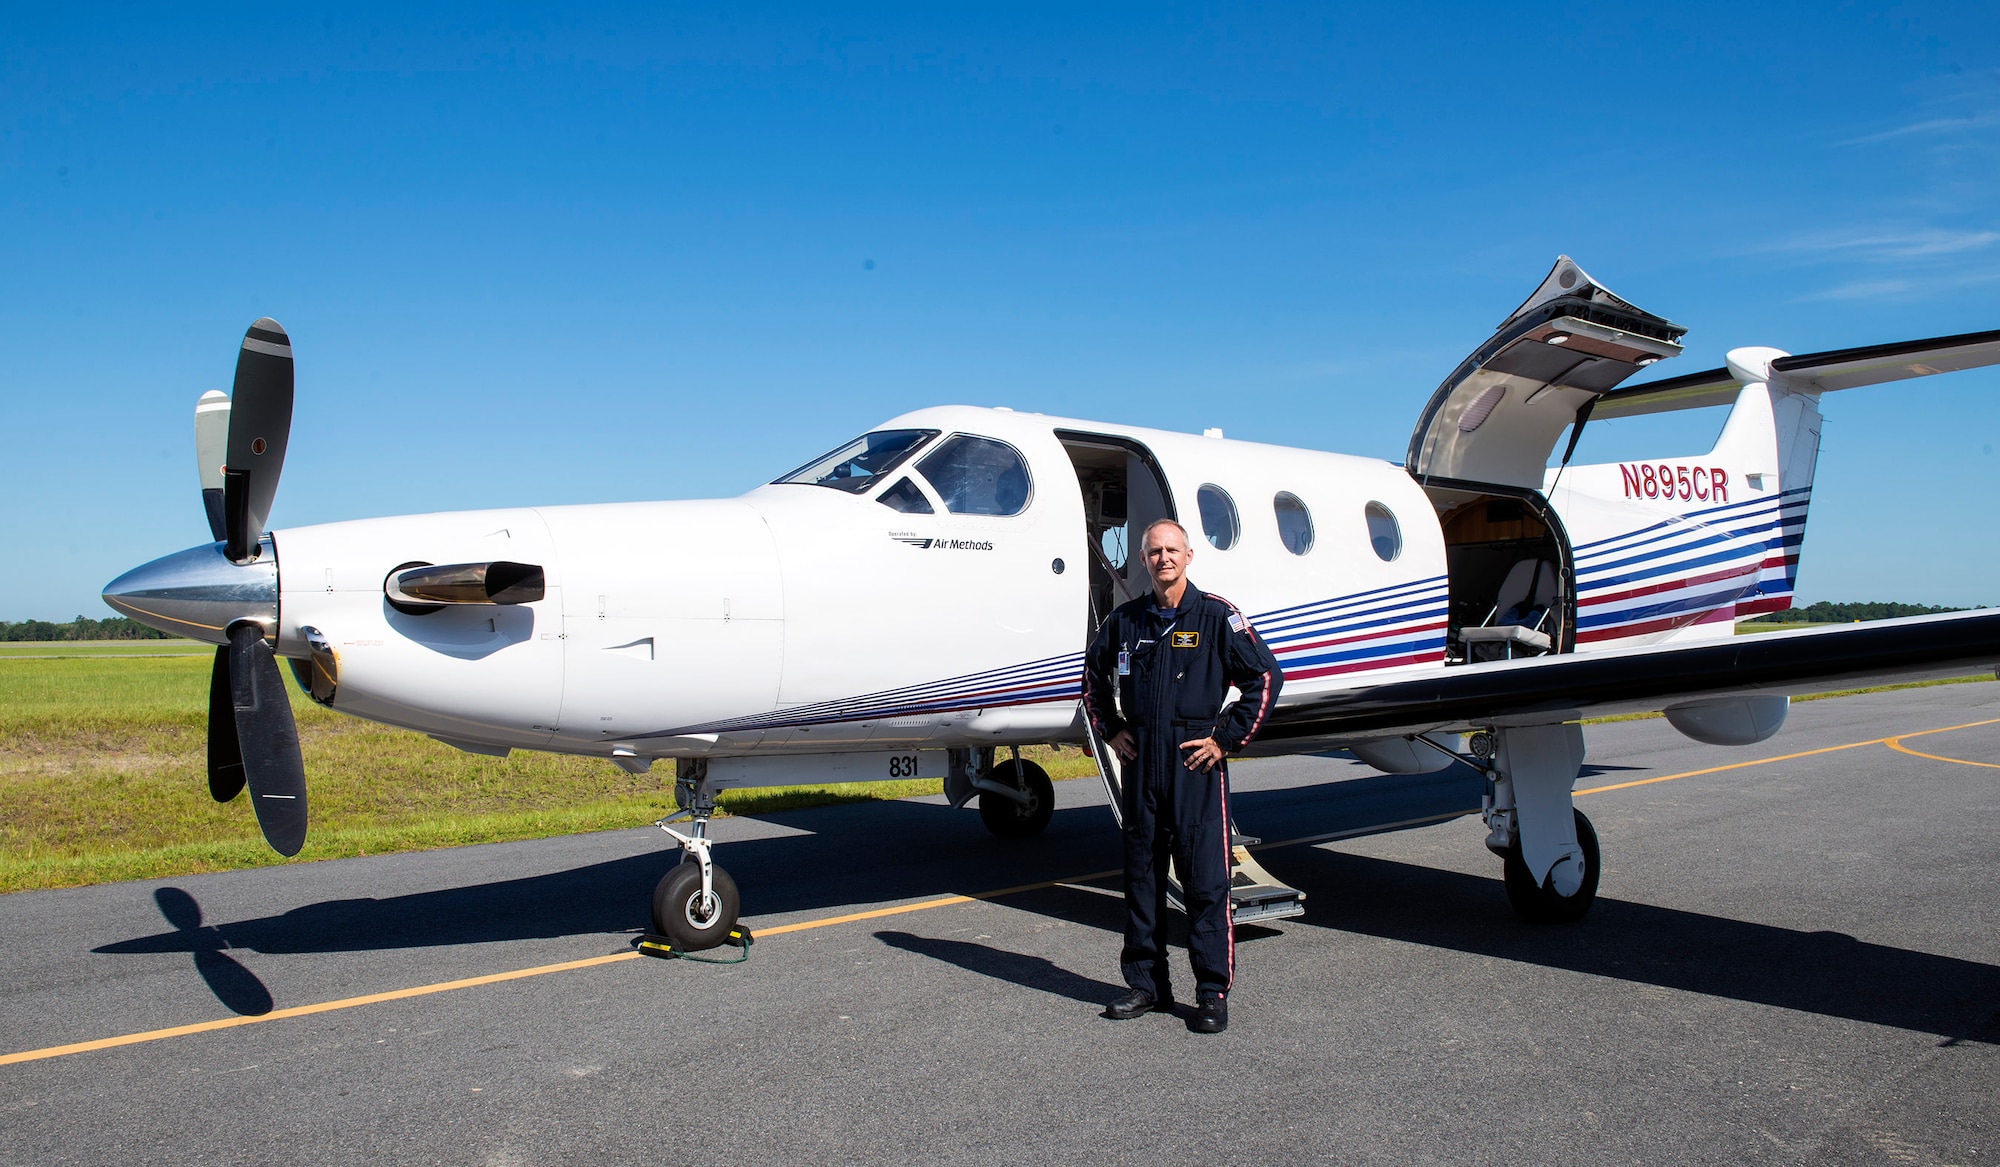 U.S. Air Force Reserve Master Sgt. Rusty Harrell, 476th Fighter Group career assistance advisor, stands in front of a Pilatus PC-12 aircraft at a local airport, July 13, 2016, in Valdosta, Ga. After serving 12 years active duty as an armament systems technician and taking a 12-year hiatus from military service, Harrell reintegrated into the Air Force Reserves in 2011 to continue his military legacy and also pursue a career as a civilian pilot. (U.S. Air Force photo by Airman 1st Class Greg Nash)